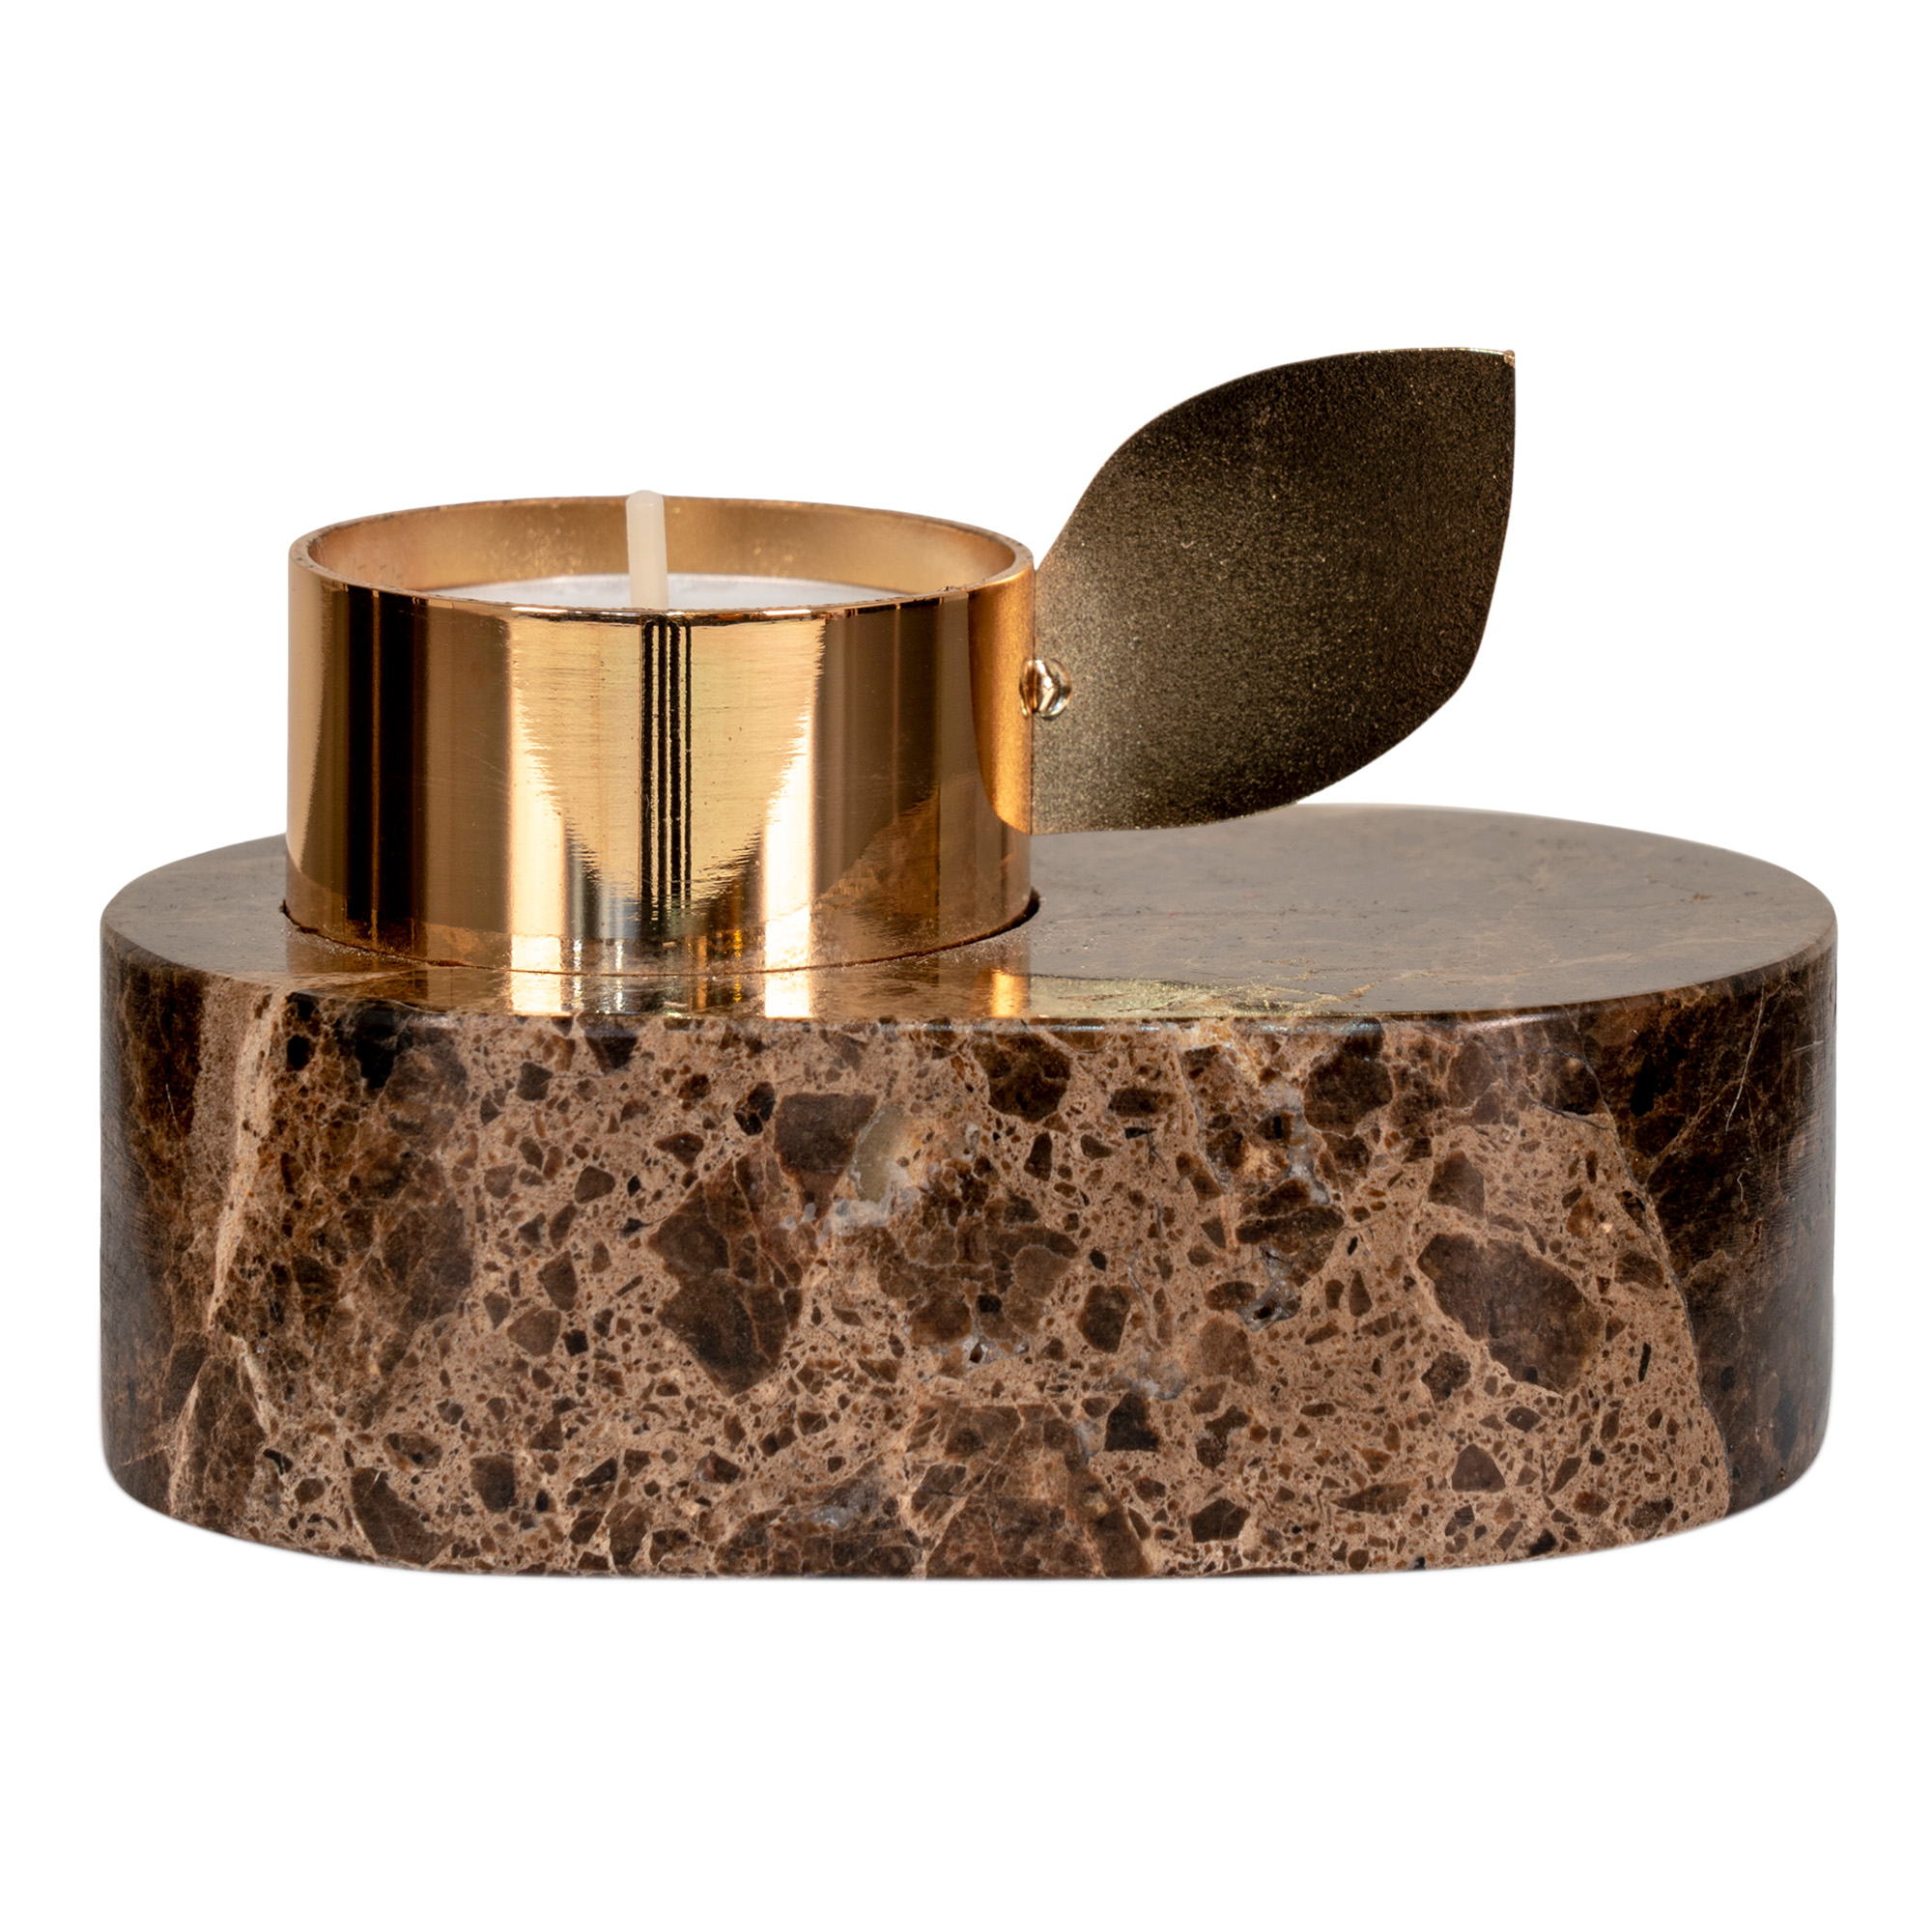 Marble Candle Holder - Marble candle holder in brown with brass holder